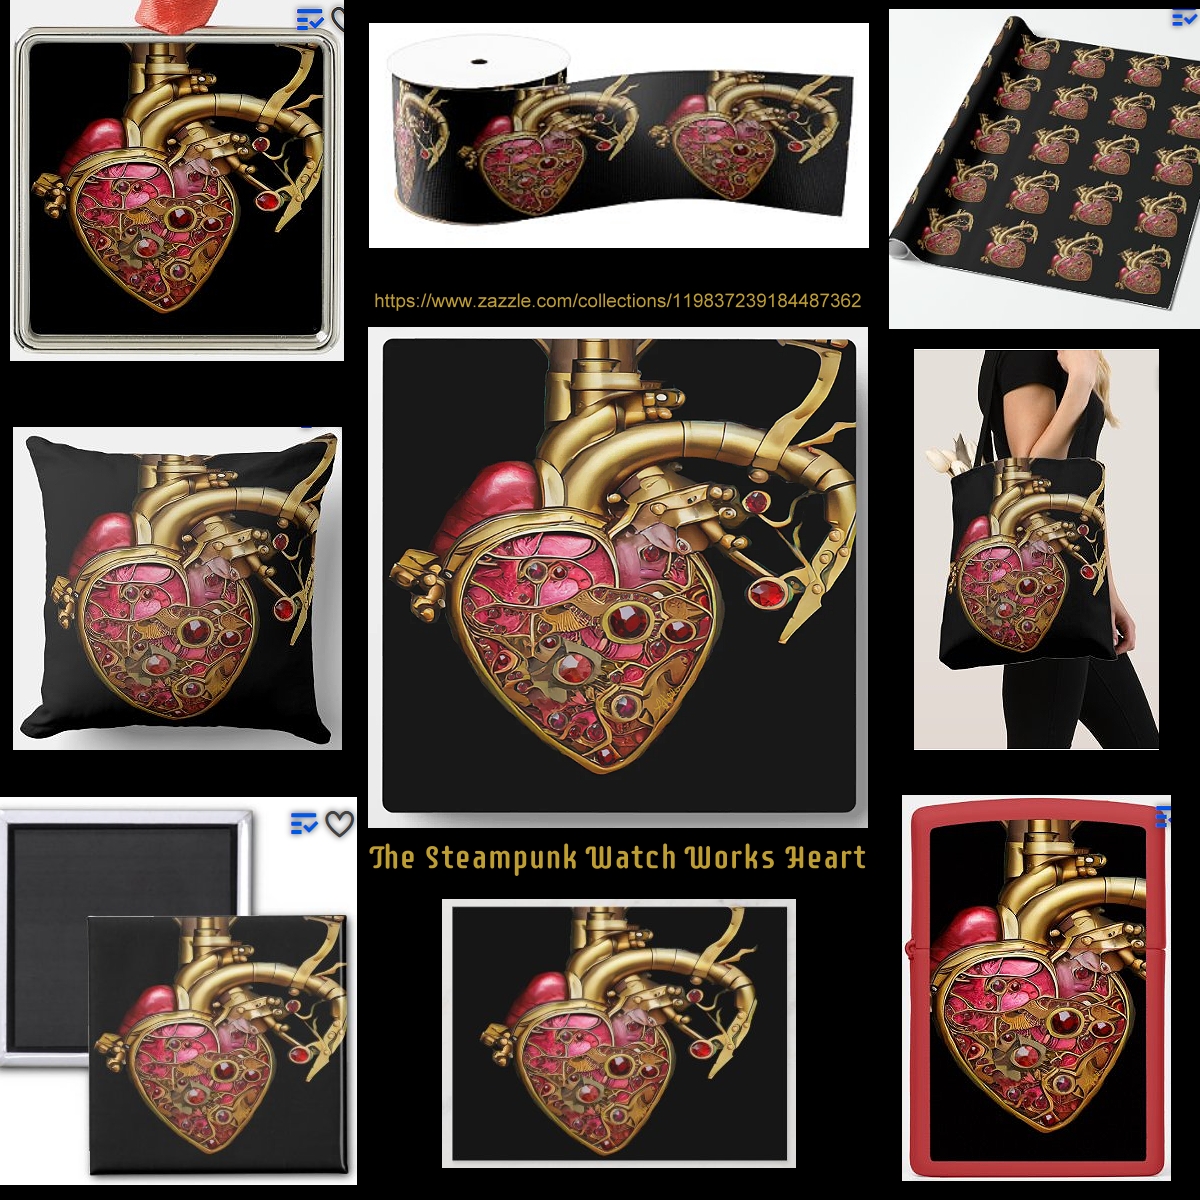 ❤️ 🖤🩸🖤🩸🖤🩸🖤 ❤️
Steampunk Anatomical Heart zazzle.com/collections/st…

#art #heart #heartdoctor #steampunkart #steampunk #anatomicalheart #watchwork #theoldticker #greetingcards #pillow  #postcards  #magnet #ornament #giftwrap #totebag #zippo lighter